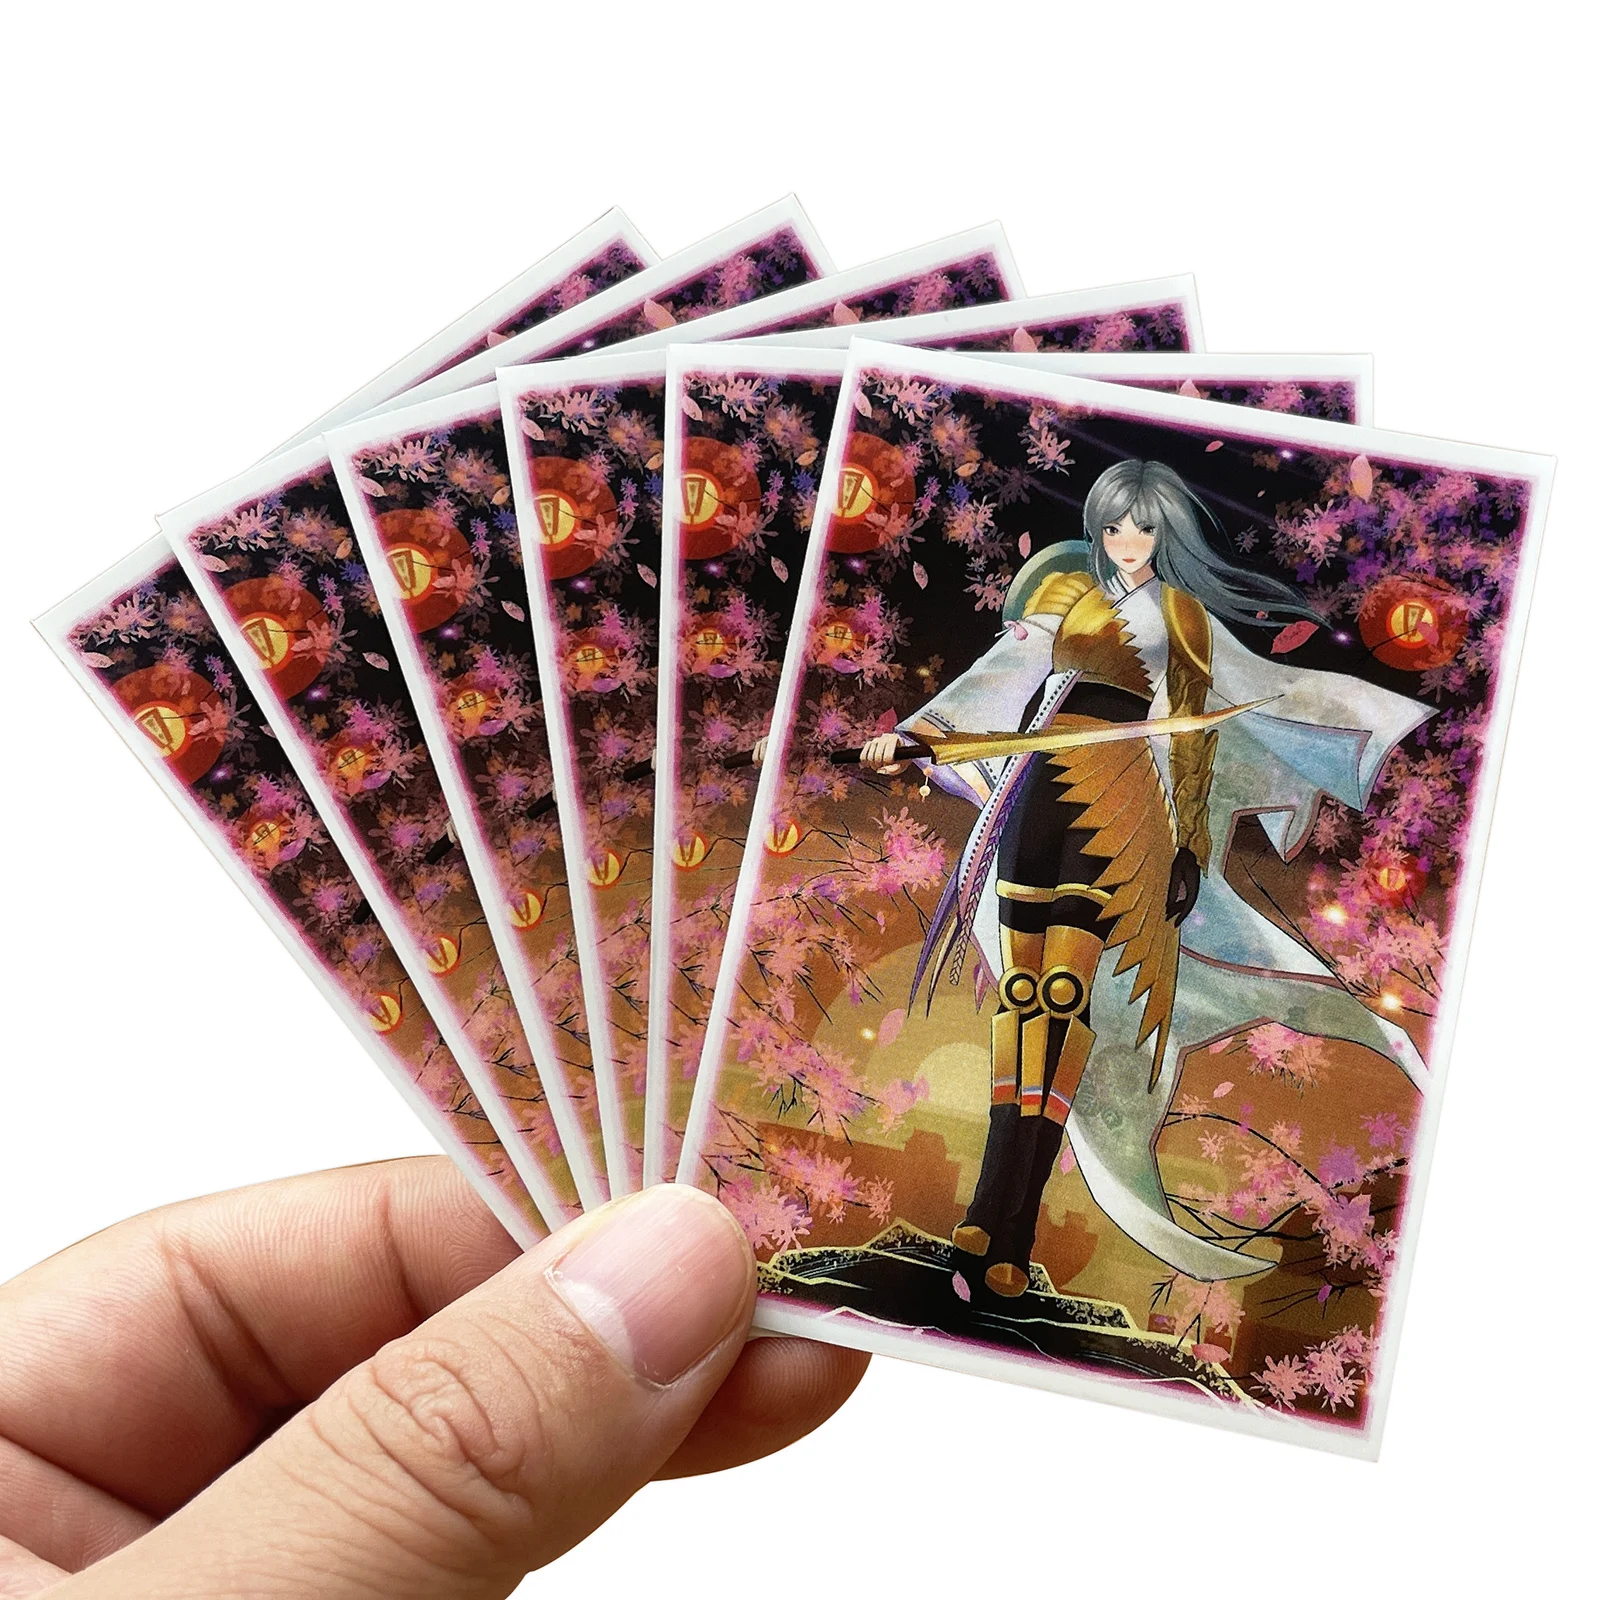 60PCS/BAG TCG Card Sleeves MGT Wandering Emperor Sleeves Game Characters Protector Cards Cover Shield Graphics Color Sleeves PKM